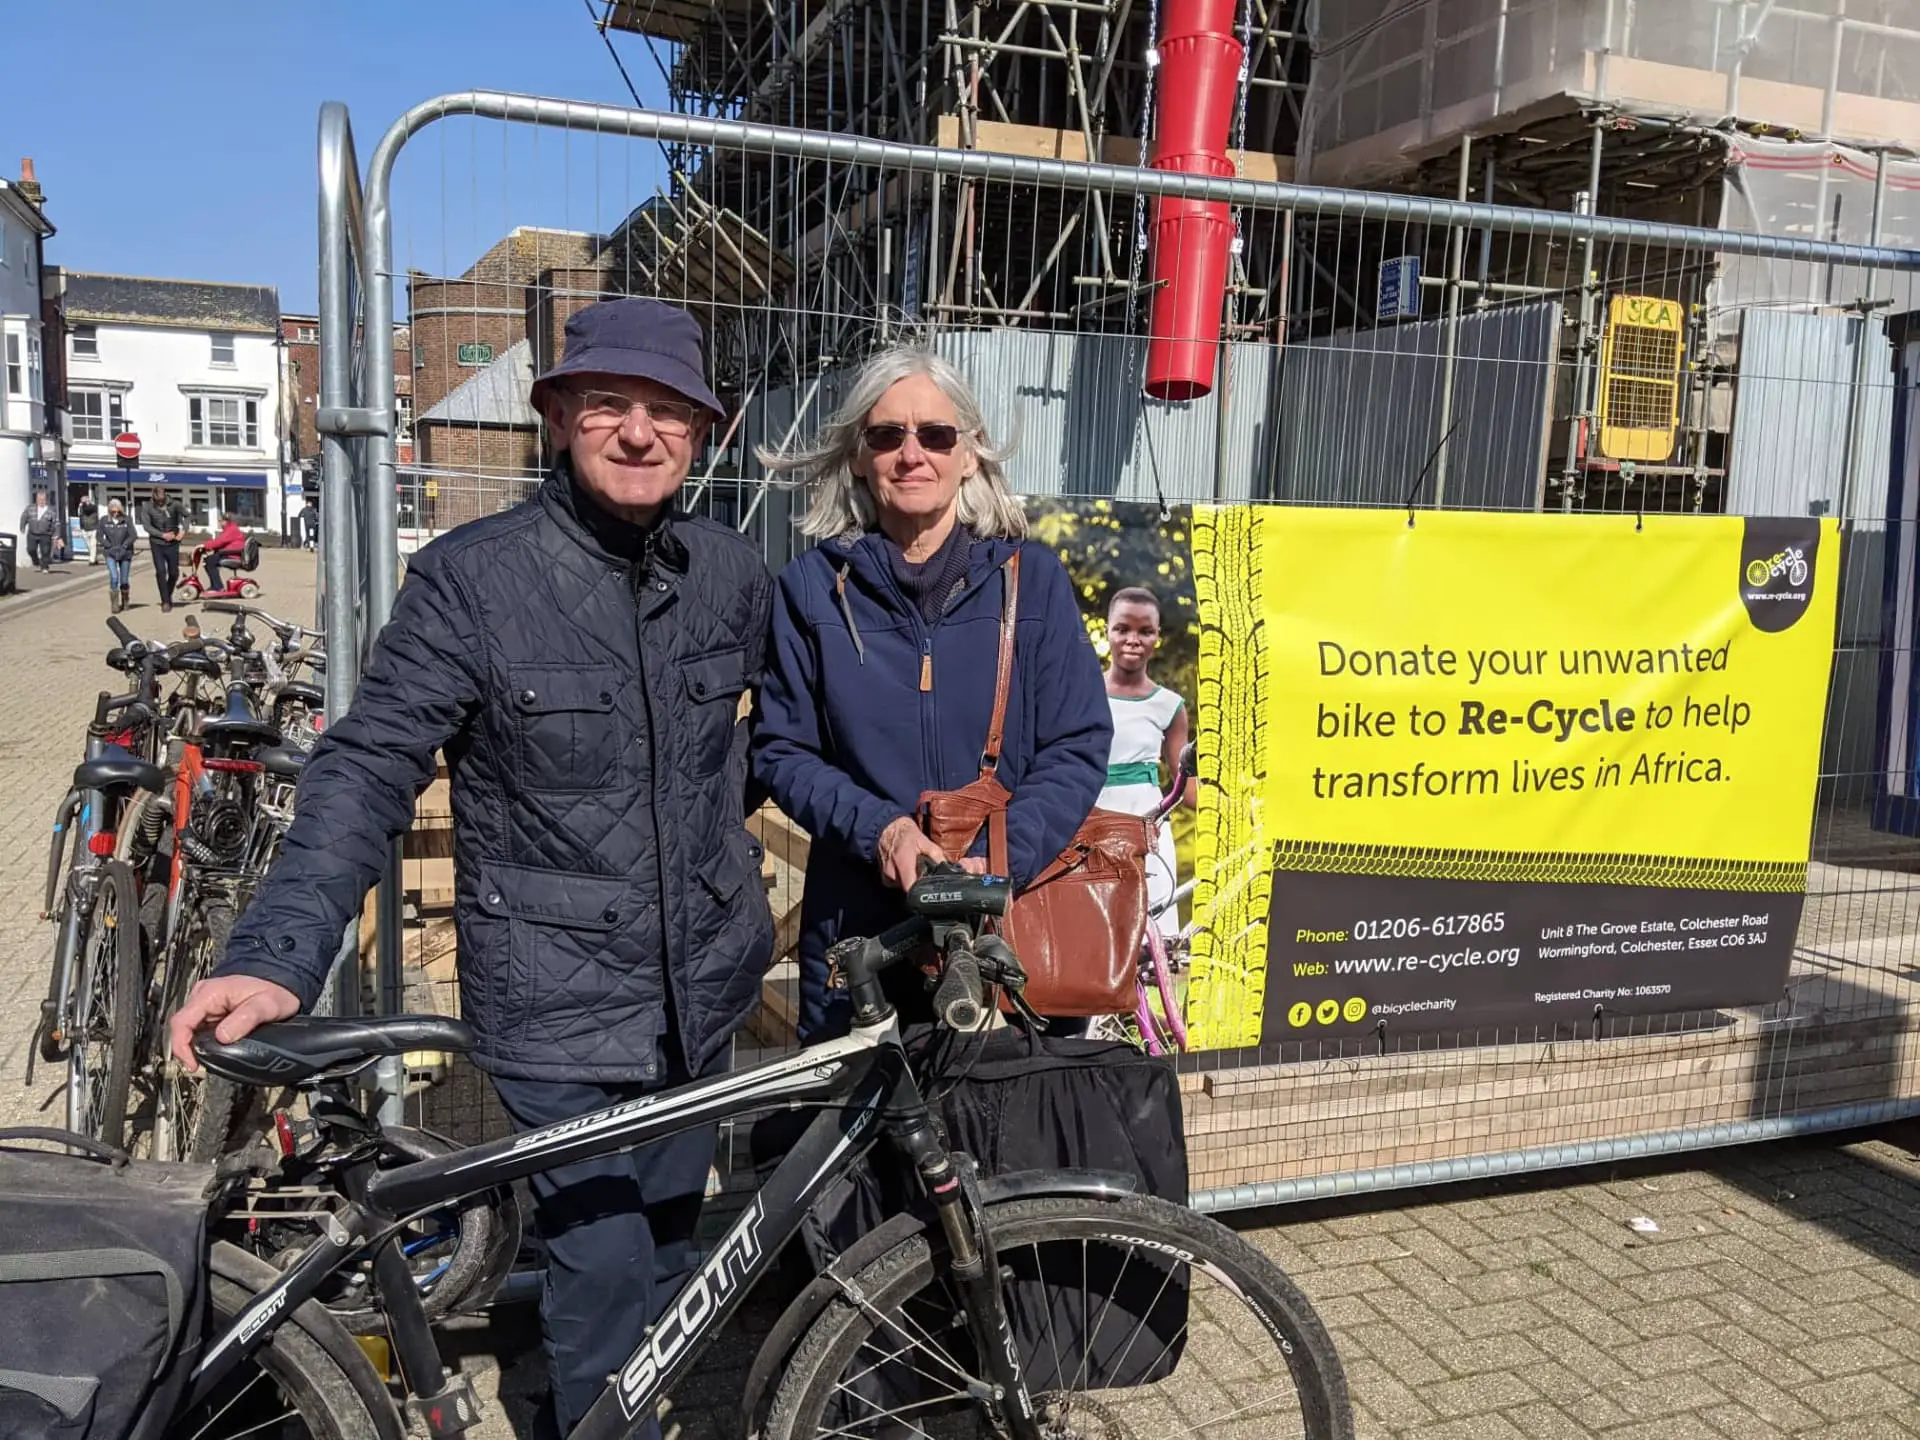 Re-cycle bike donation day March 2022